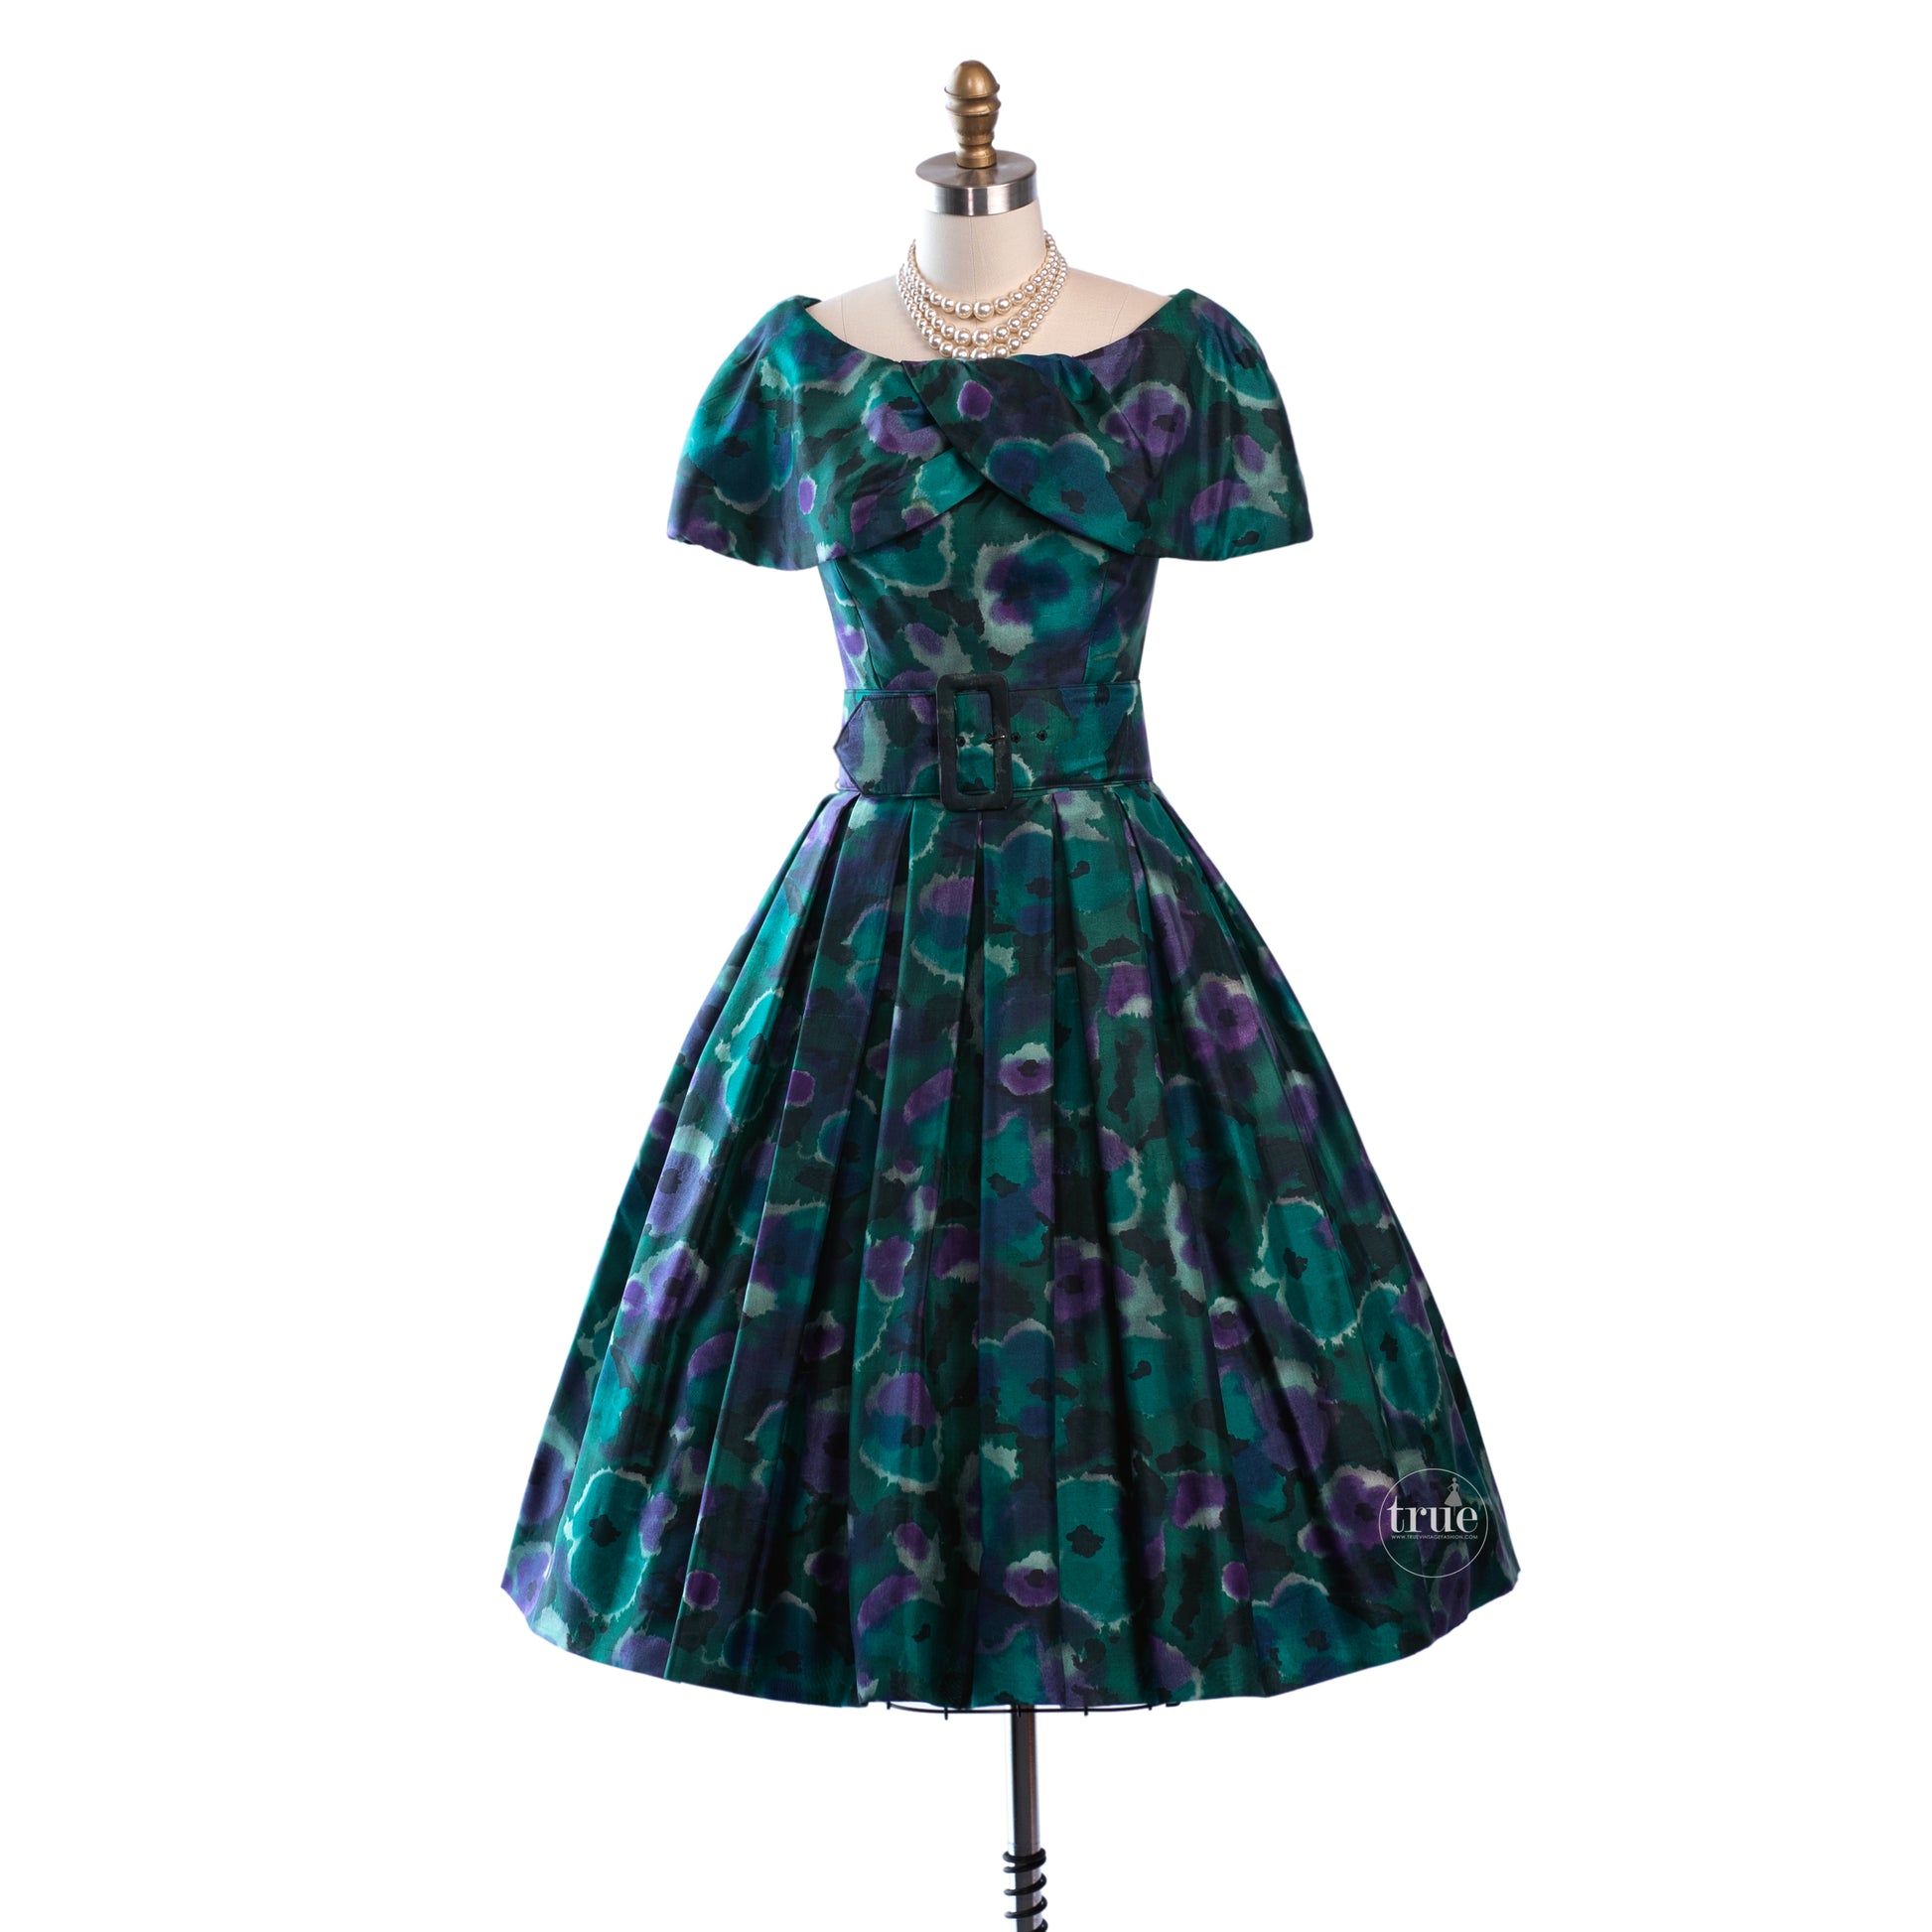 vintage 1950's dress ...dior inspired GIGI YOUNG NEW YORK silk shantung watercolor floral full skirt cocktail party dress